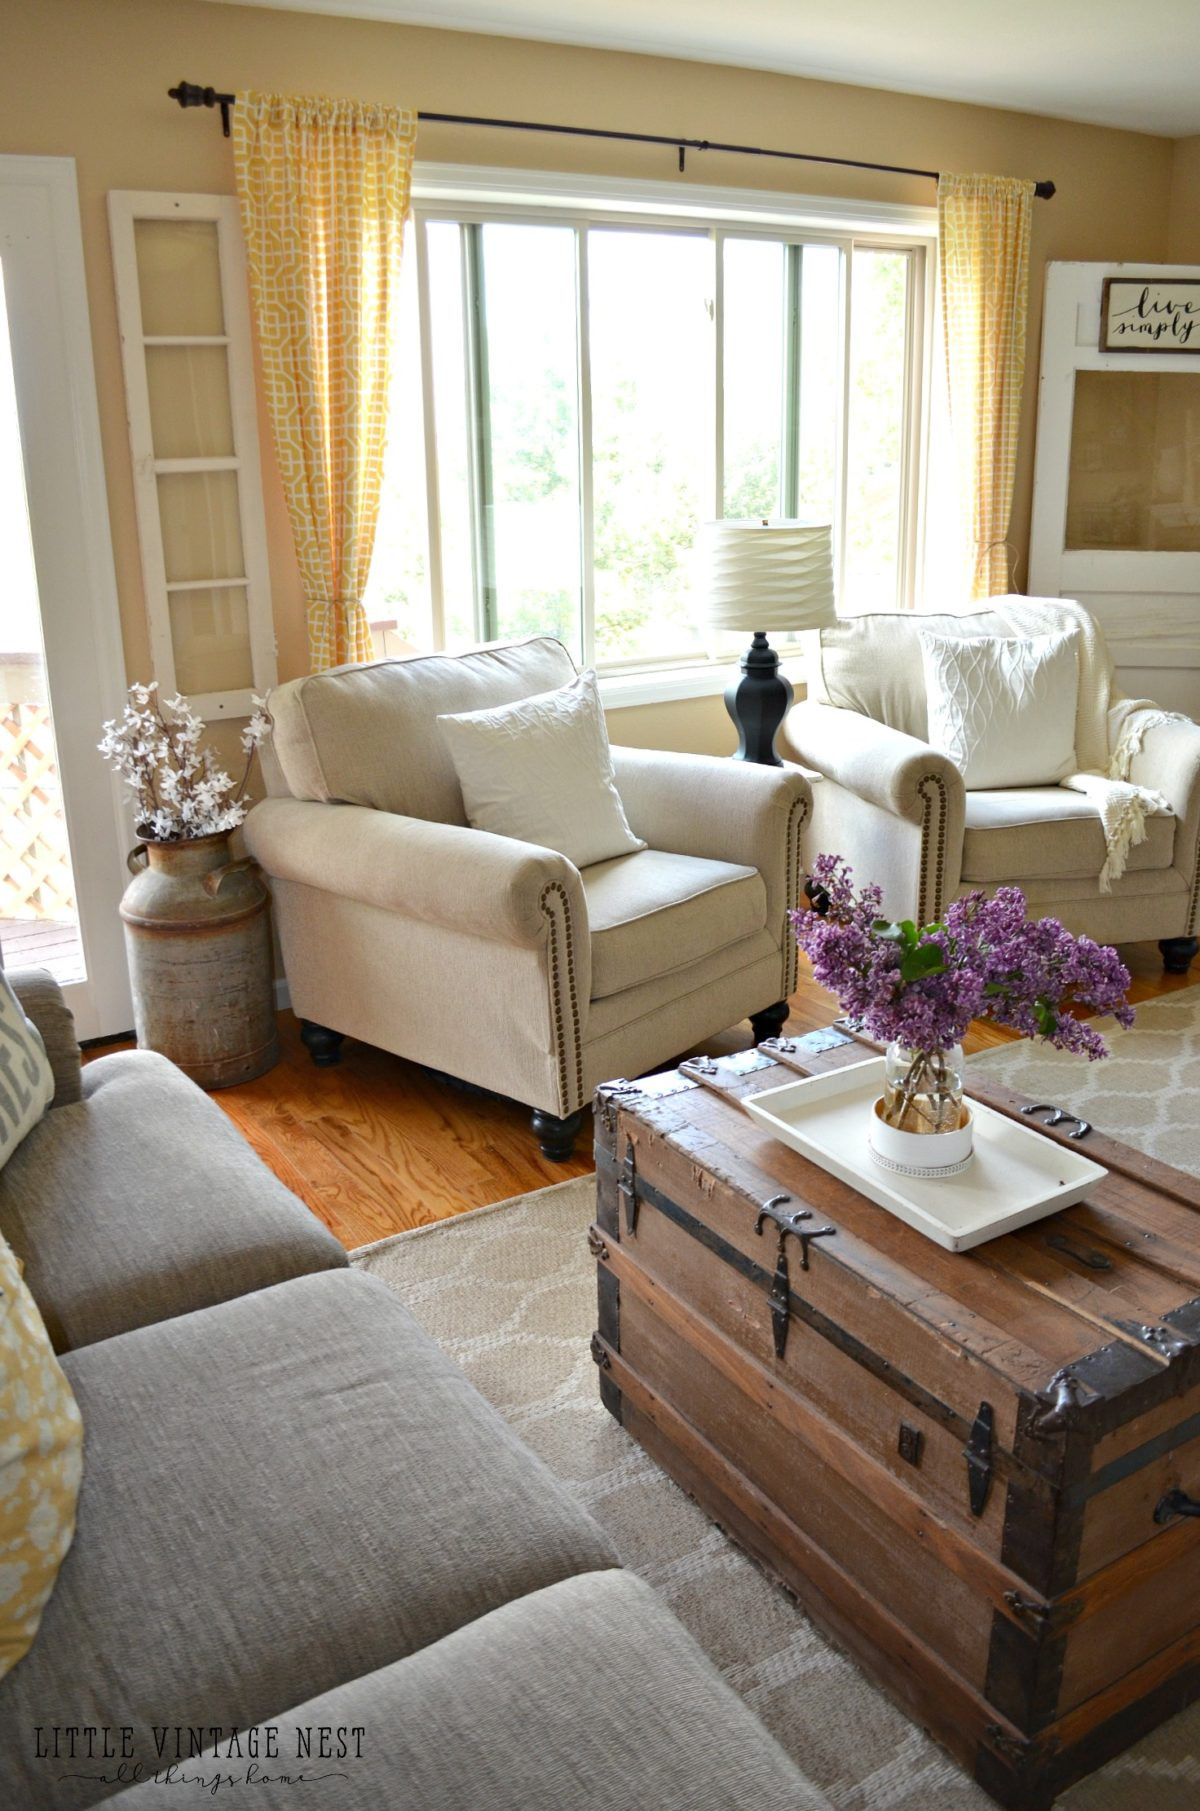 Farmhouse Chic Living Room
 How I Transitioned to Farmhouse Style Little Vintage Nest